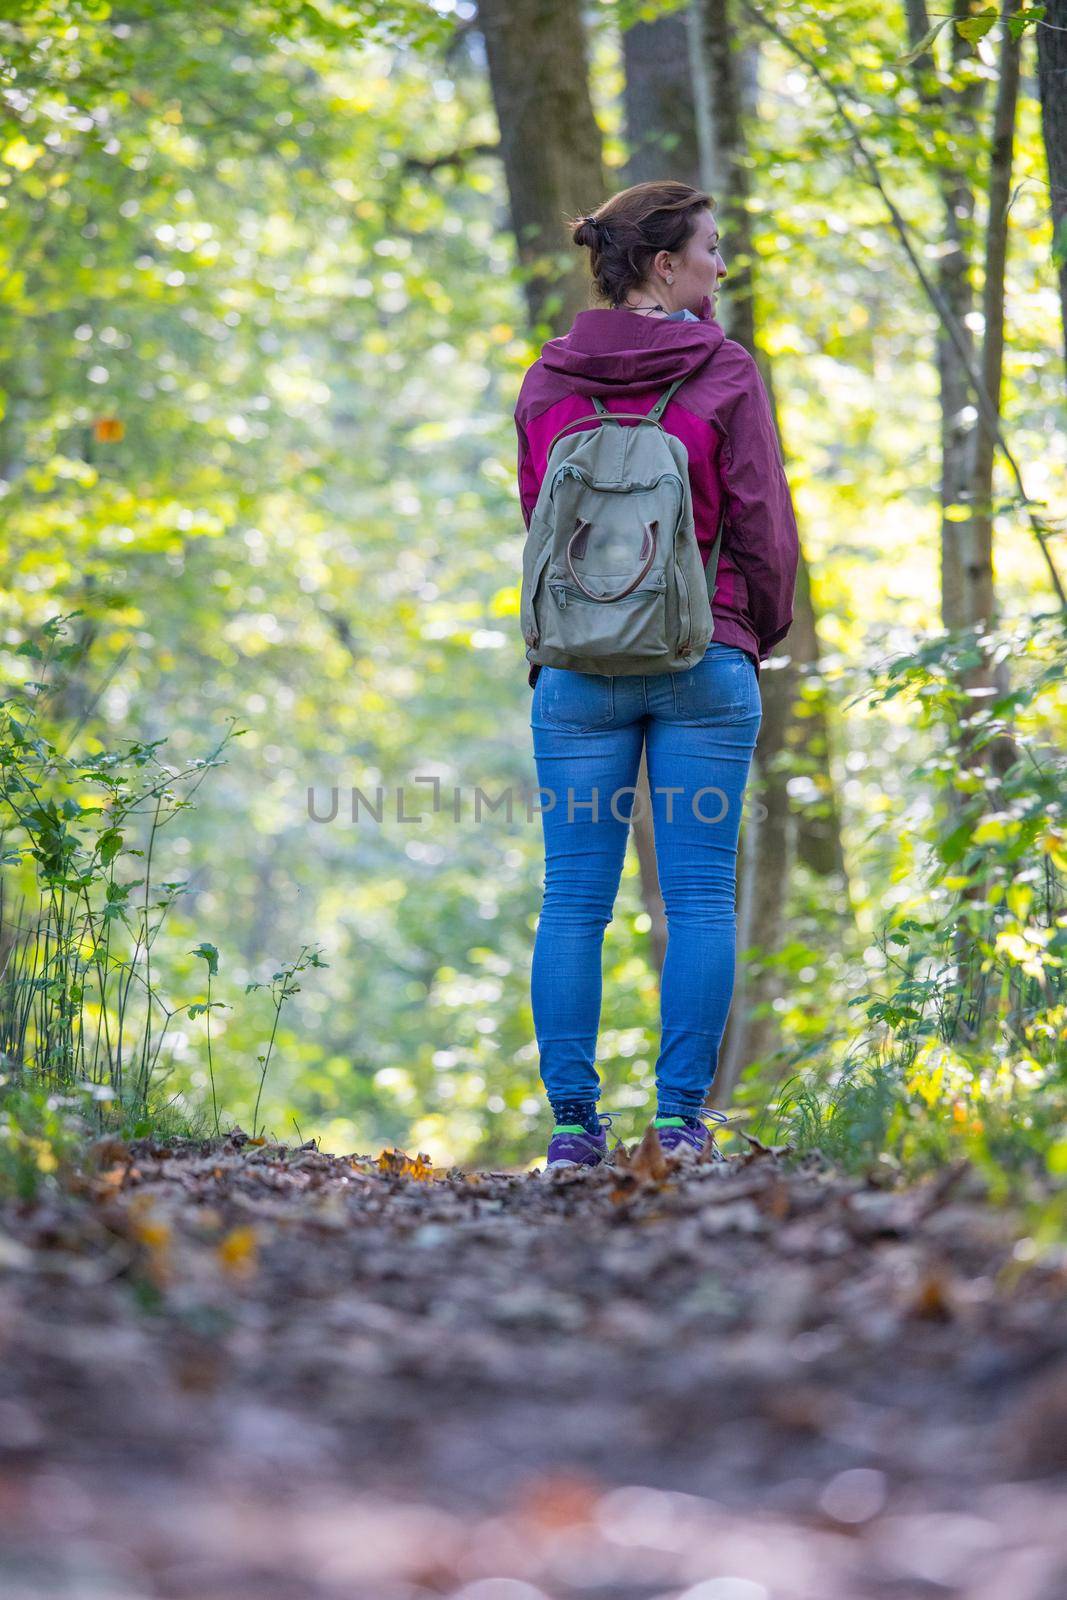 Get your mind free and forest therapy concept: Young girl is hiking through the green forest by Daxenbichler